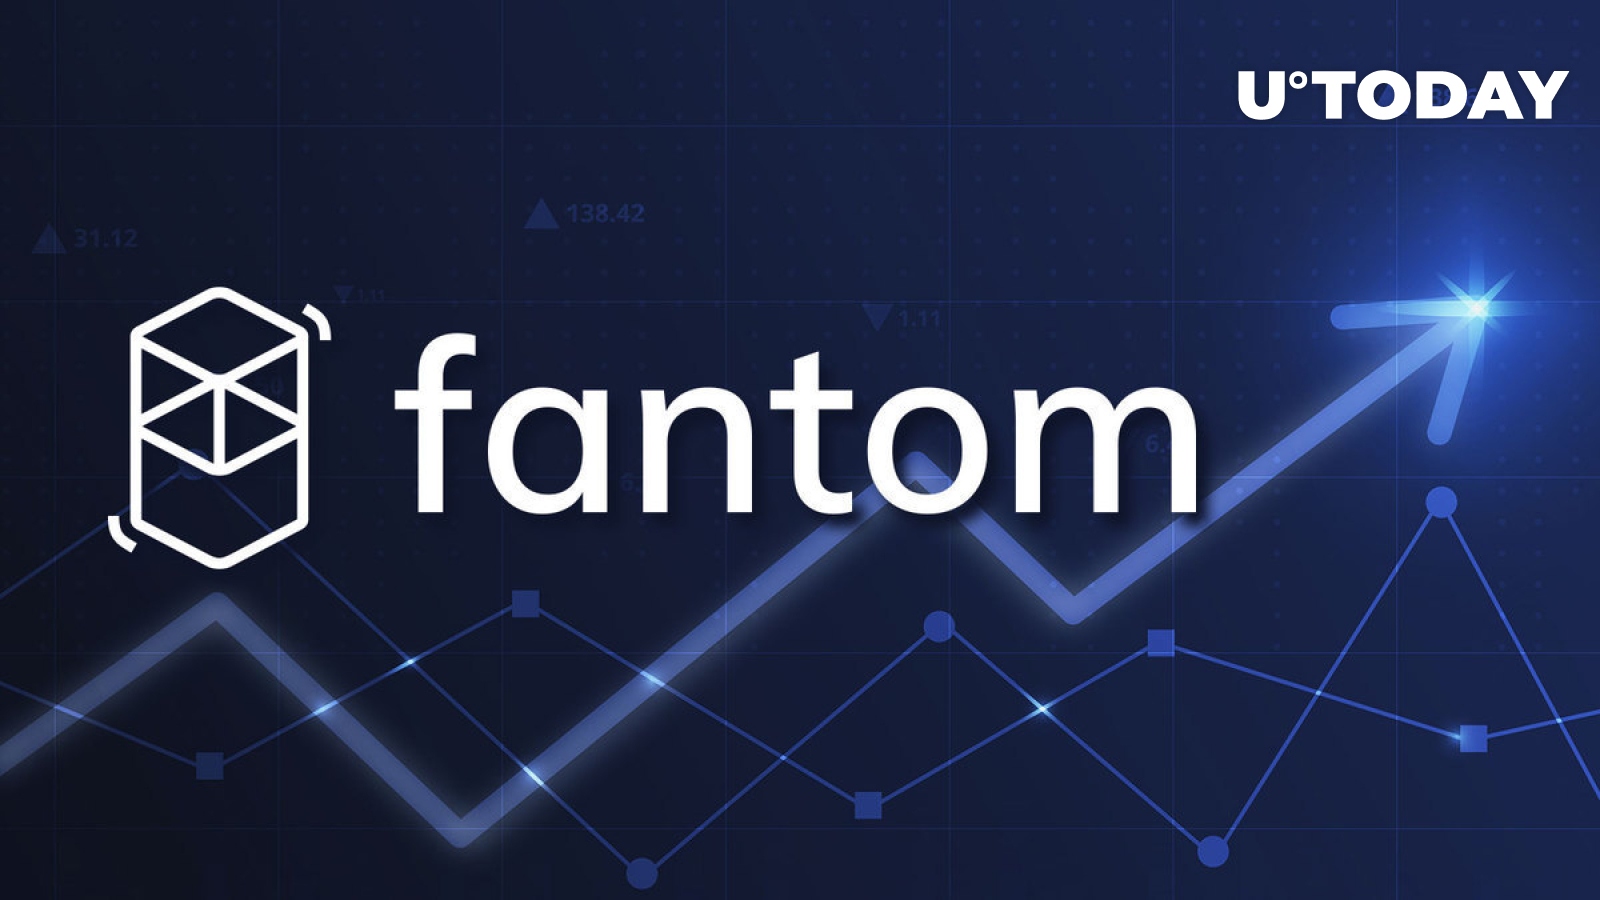 Fantom (FTM) up 14%, With No Visible Trigger, What Is Driving This Growth?